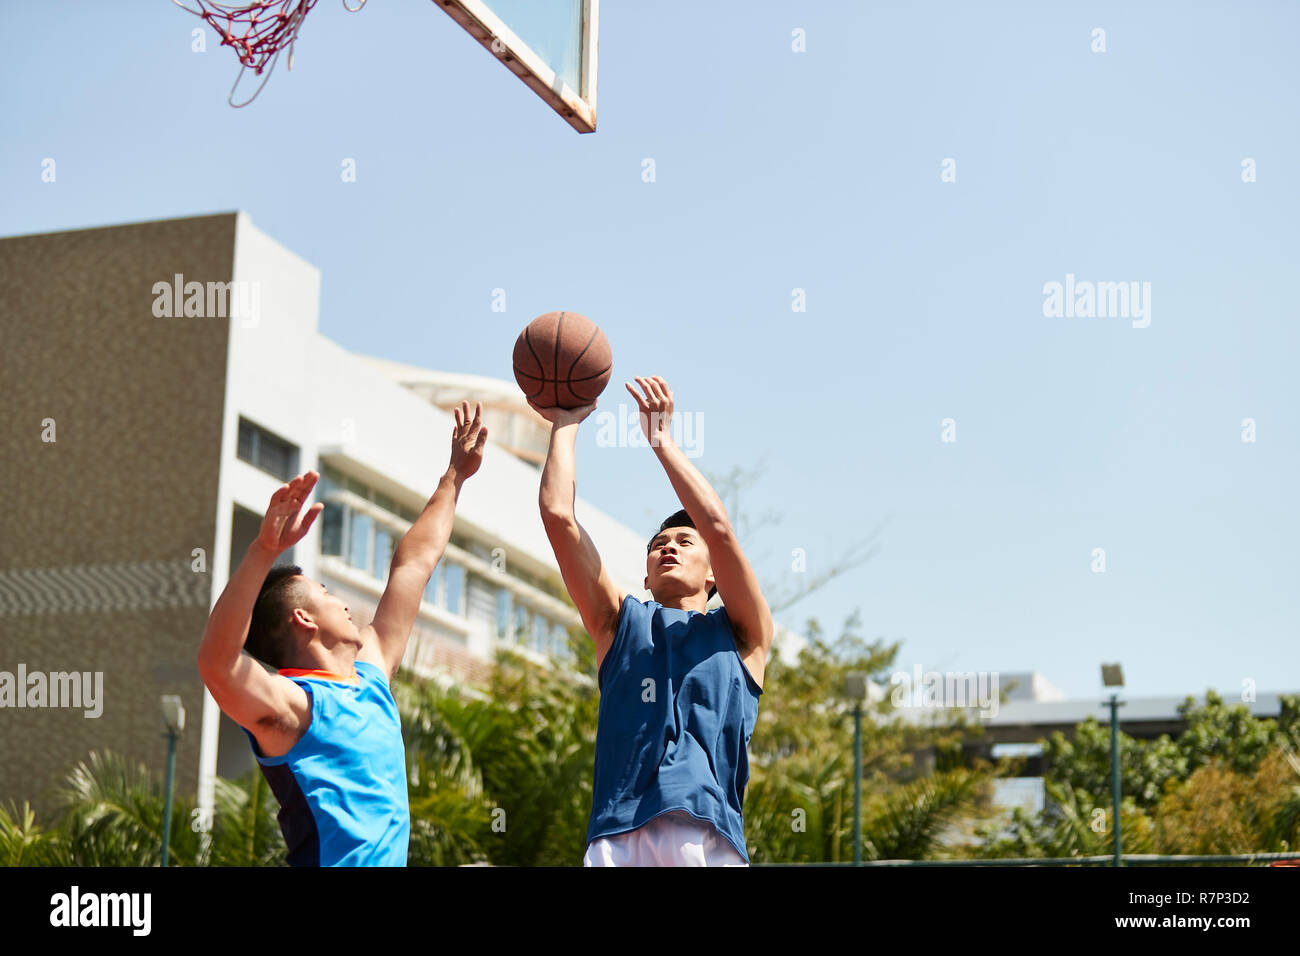 young asian basketball player shooting the ball over defender on outdoor court. Stock Photo